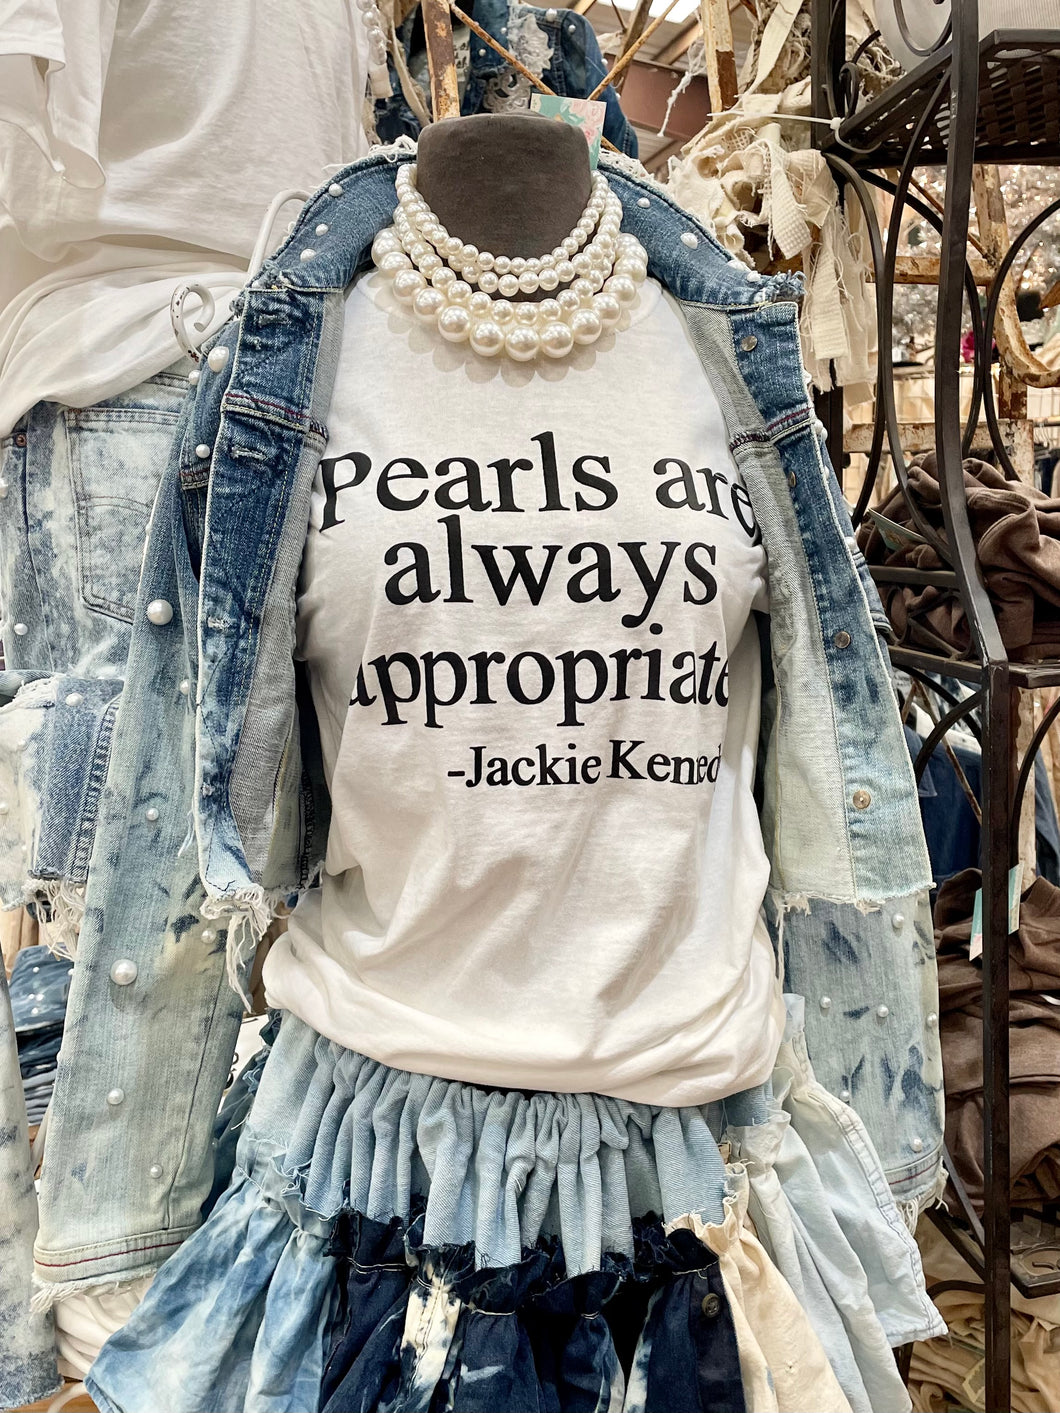 Pearls are Always Appropriate Jackie O Kennedy quote tee